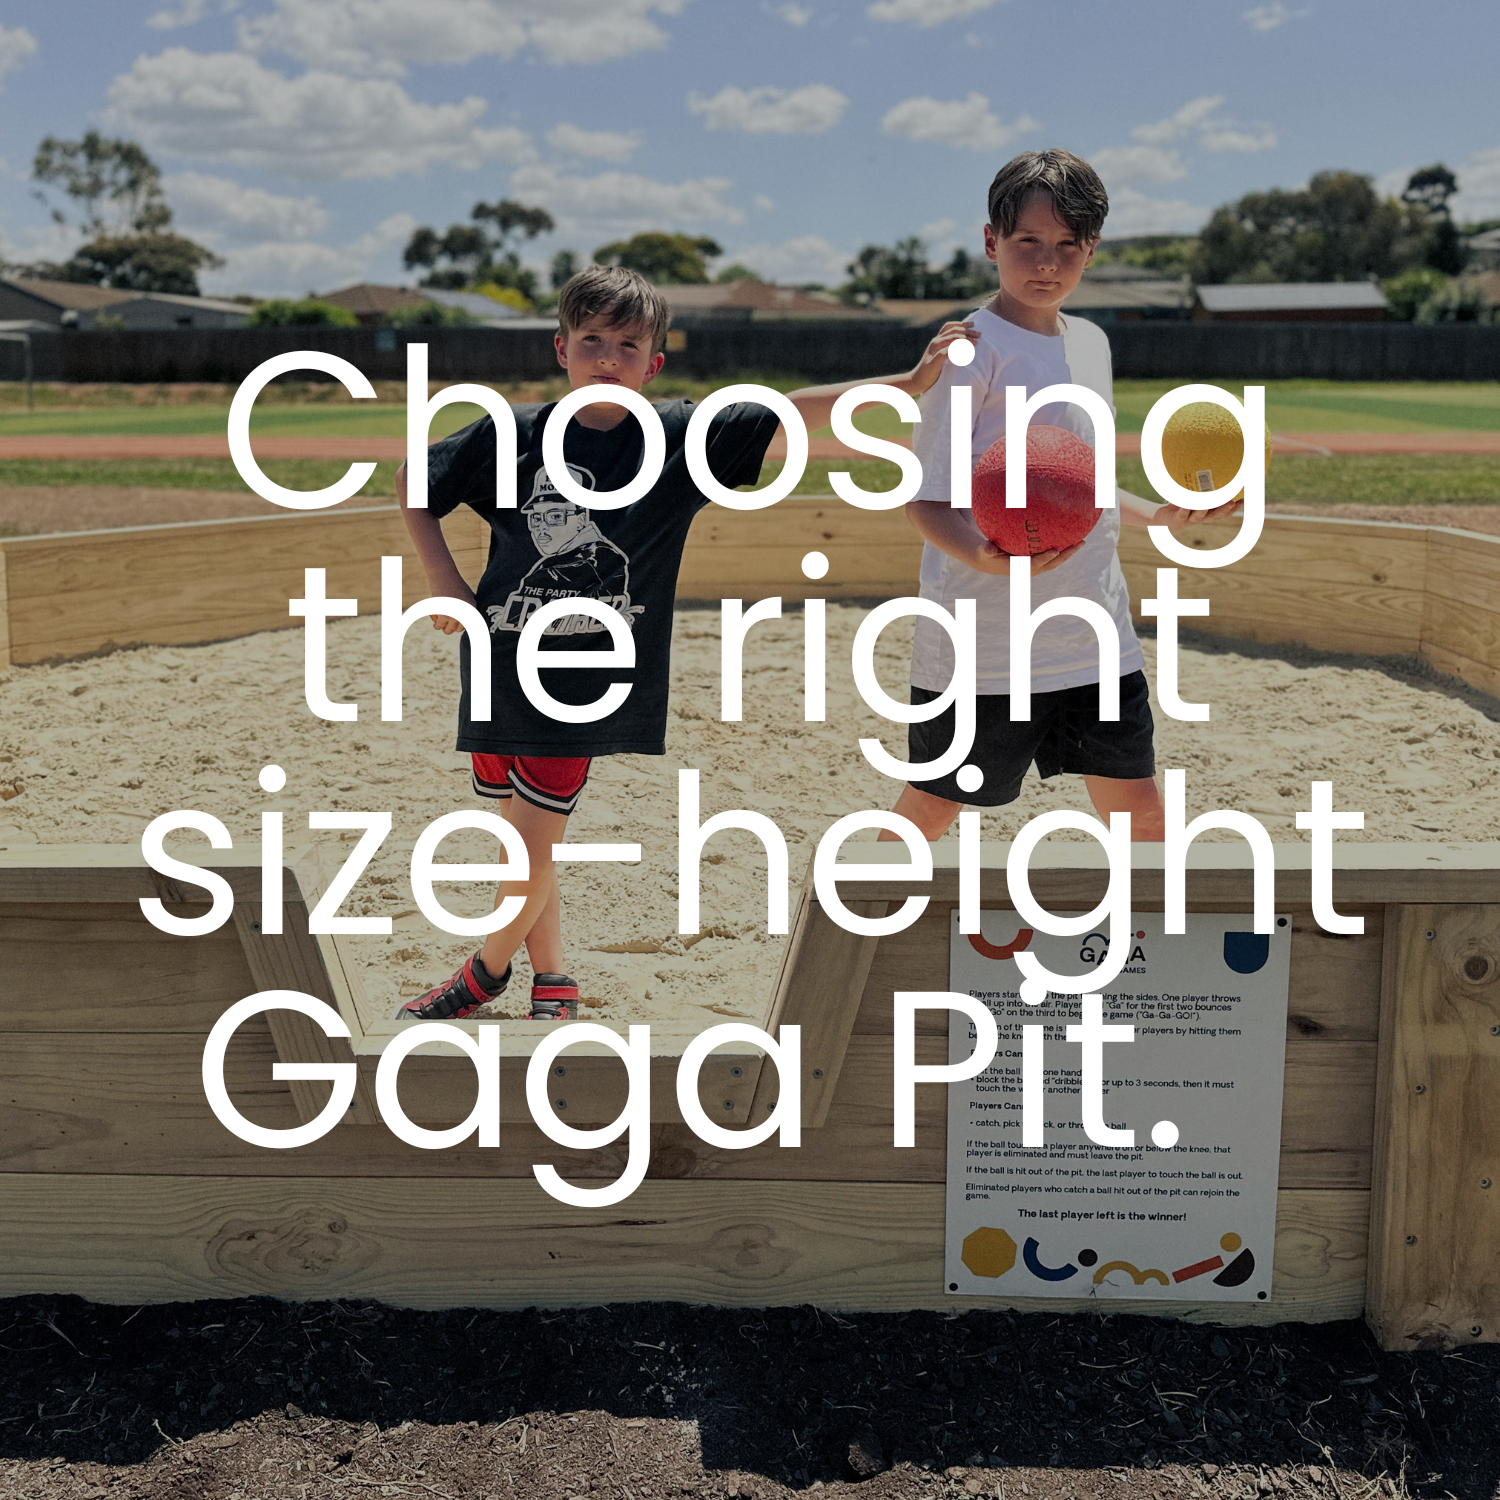 2 boys standing in a gaga ball pit with text of image stating 'Choosing the right size-height Gaga Pit.'